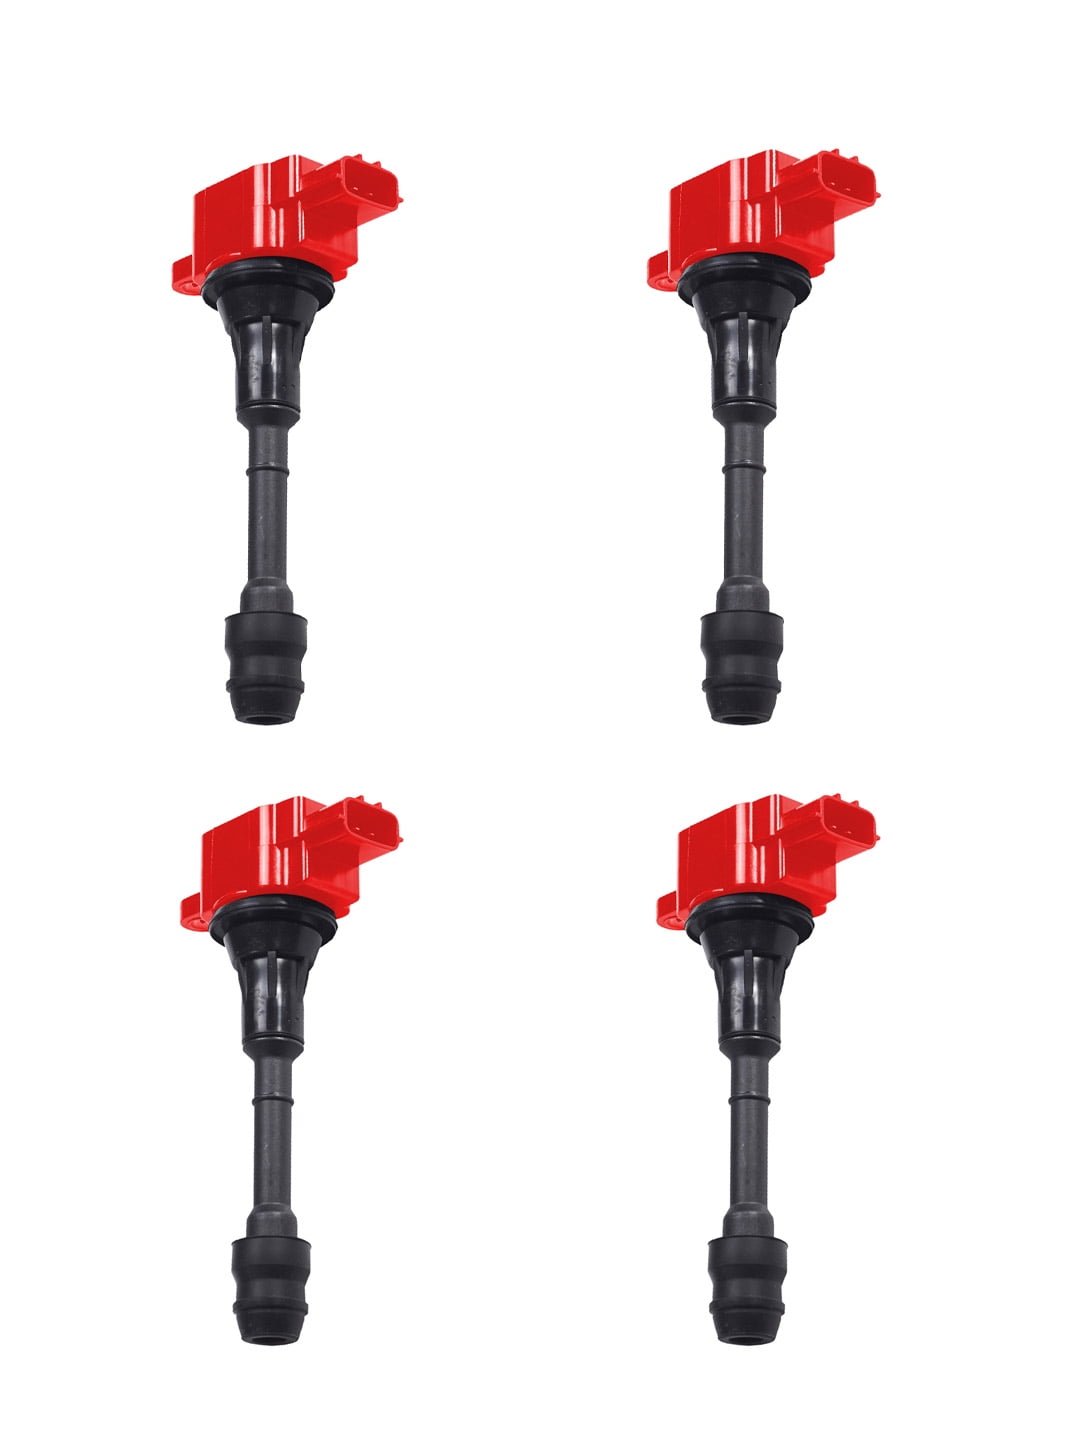 New Ignition Coil for 2002-2007 Nissan Altima Sentra X-Trail 2.5L UF350 Set of 4 